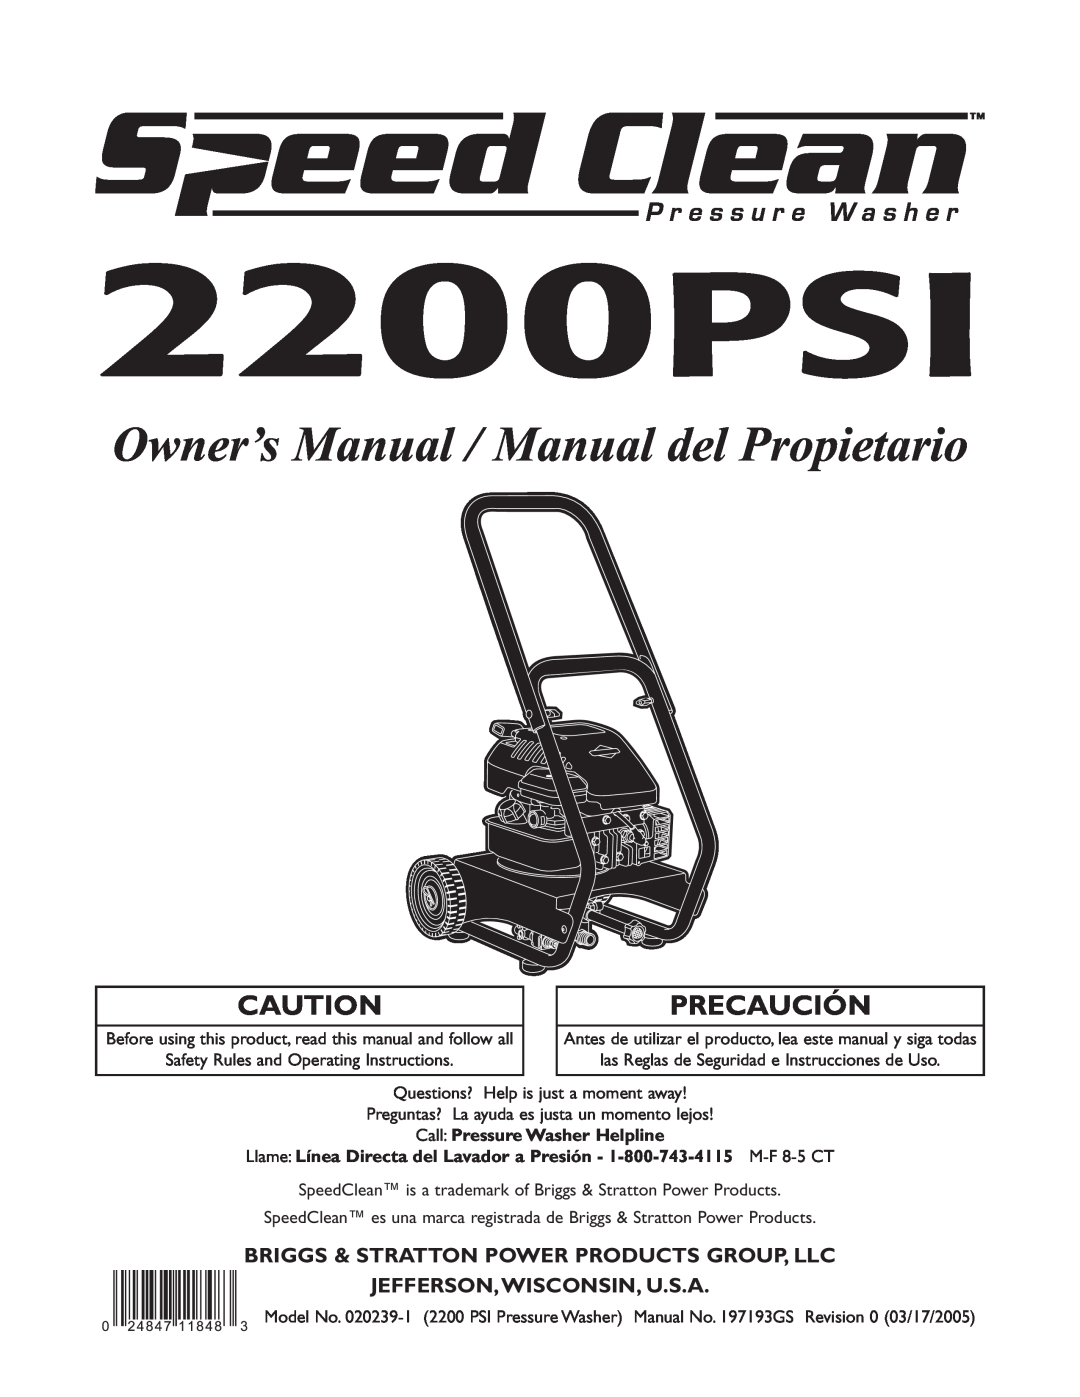 Briggs & Stratton 020239-1 owner manual Briggs & Stratton Power Products Group, Llc, Jefferson,Wisconsin, U.S.A, 2200PSI 